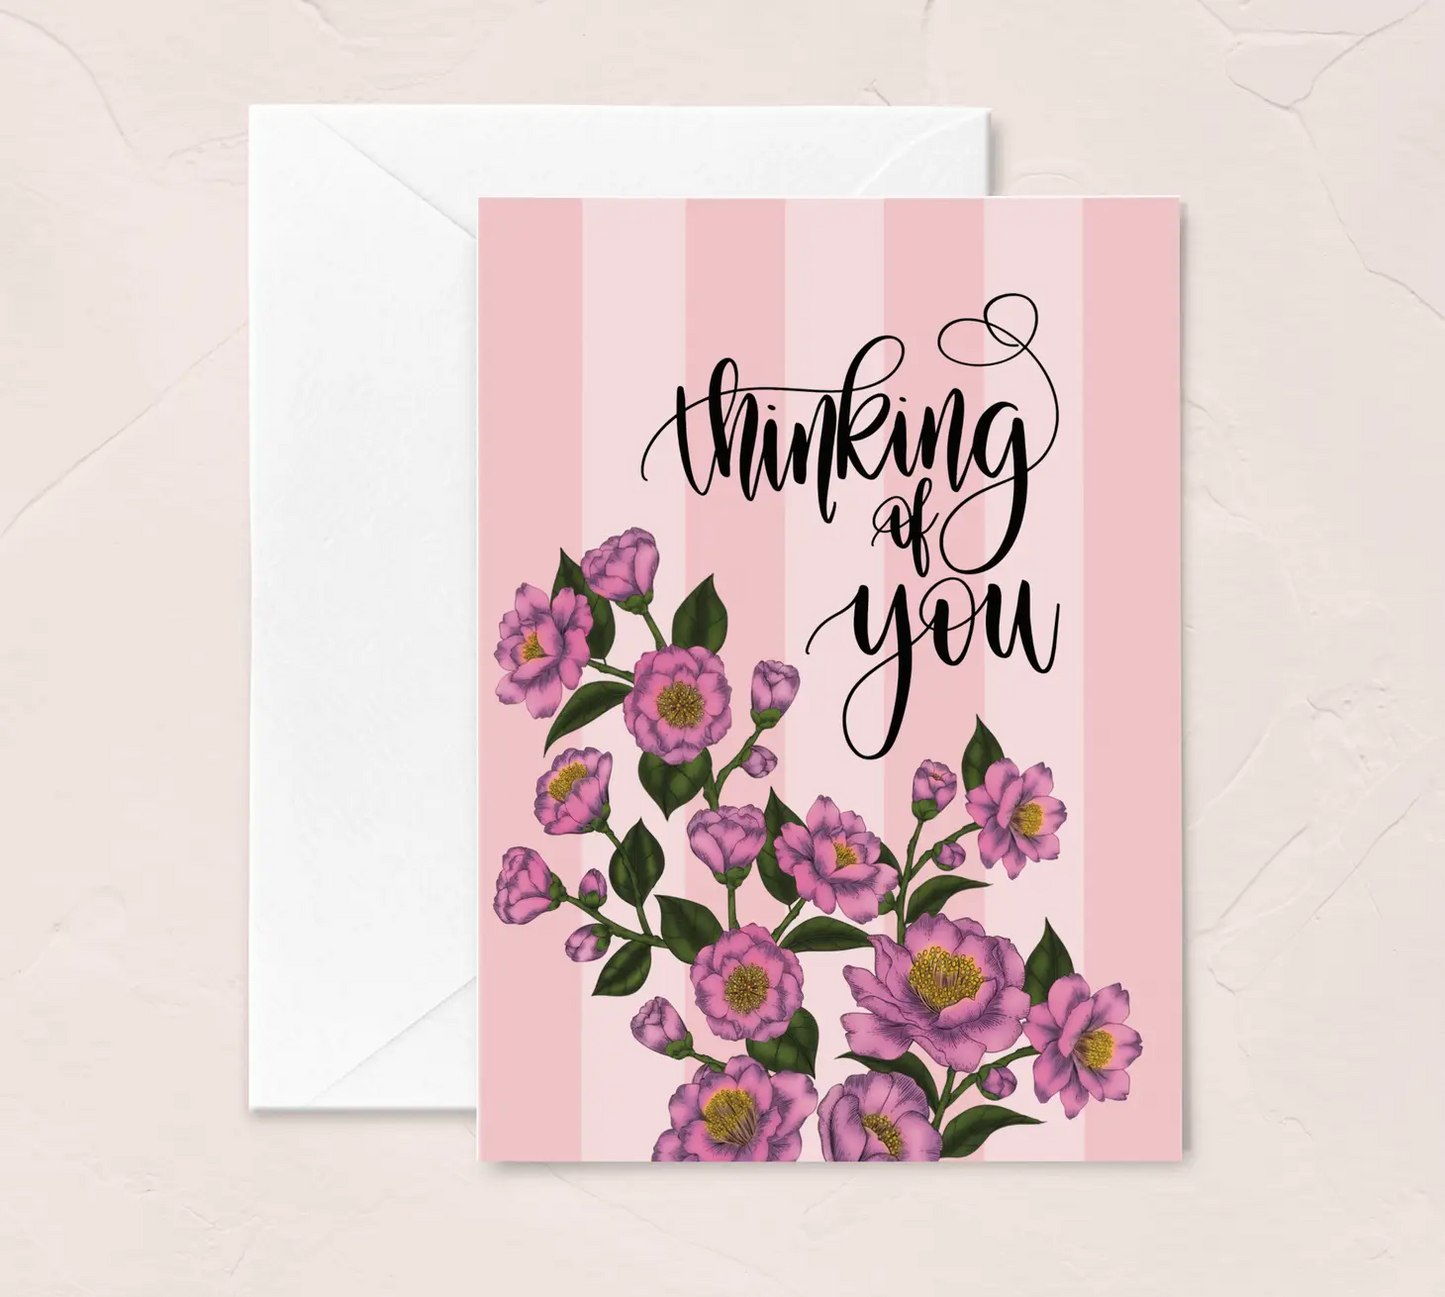 Assorted Floral Greeting Cards (Set of 6)